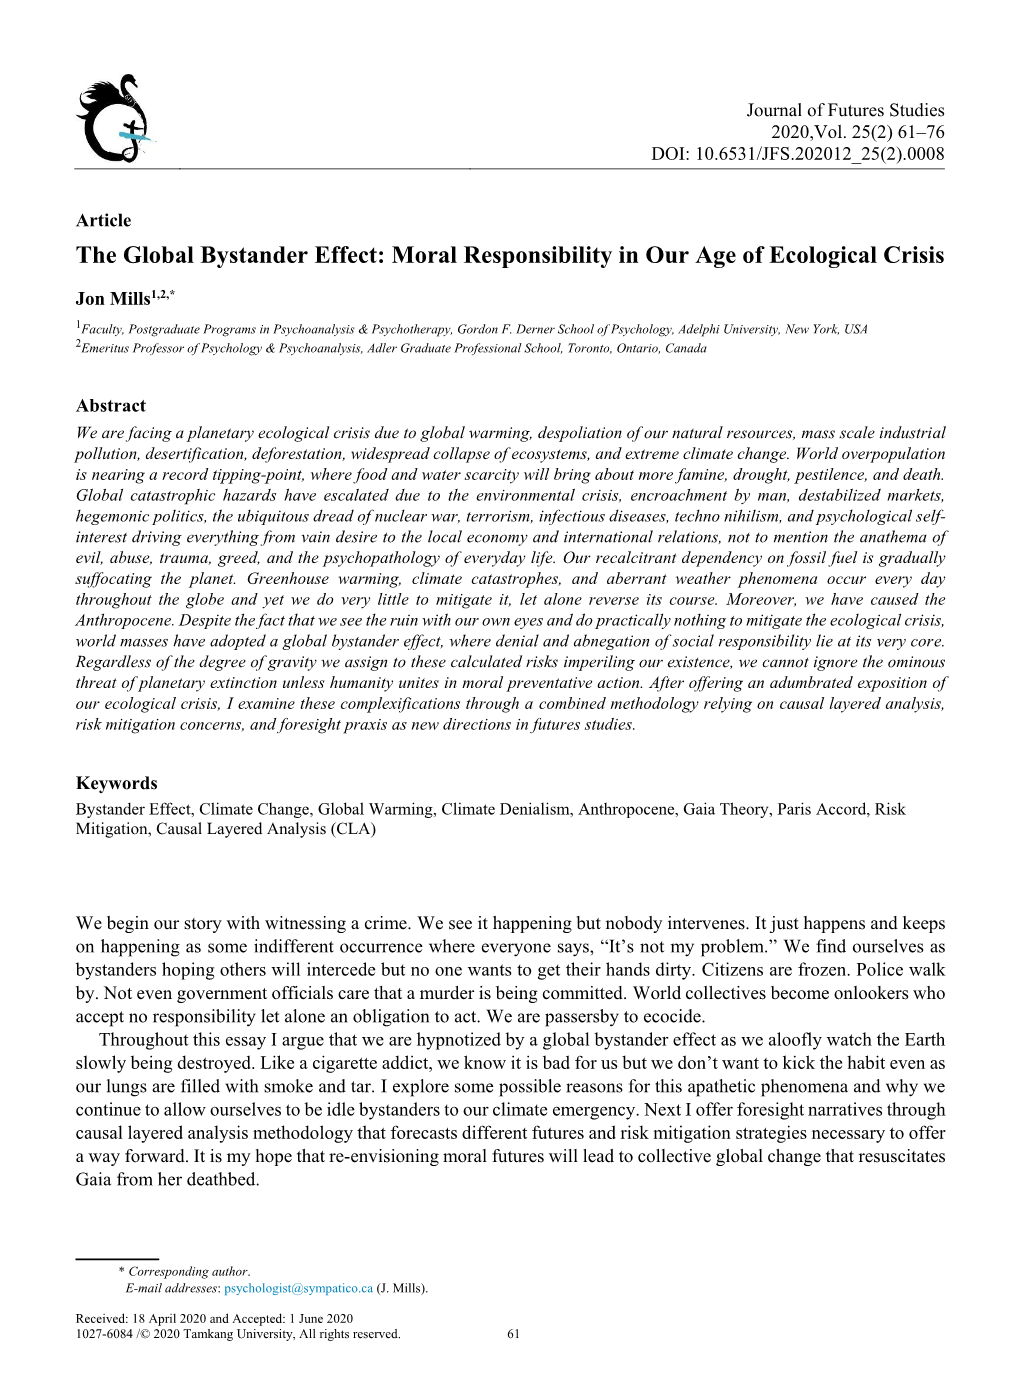 The Global Bystander Effect: Moral Responsibility in Our Age of Ecological Crisis